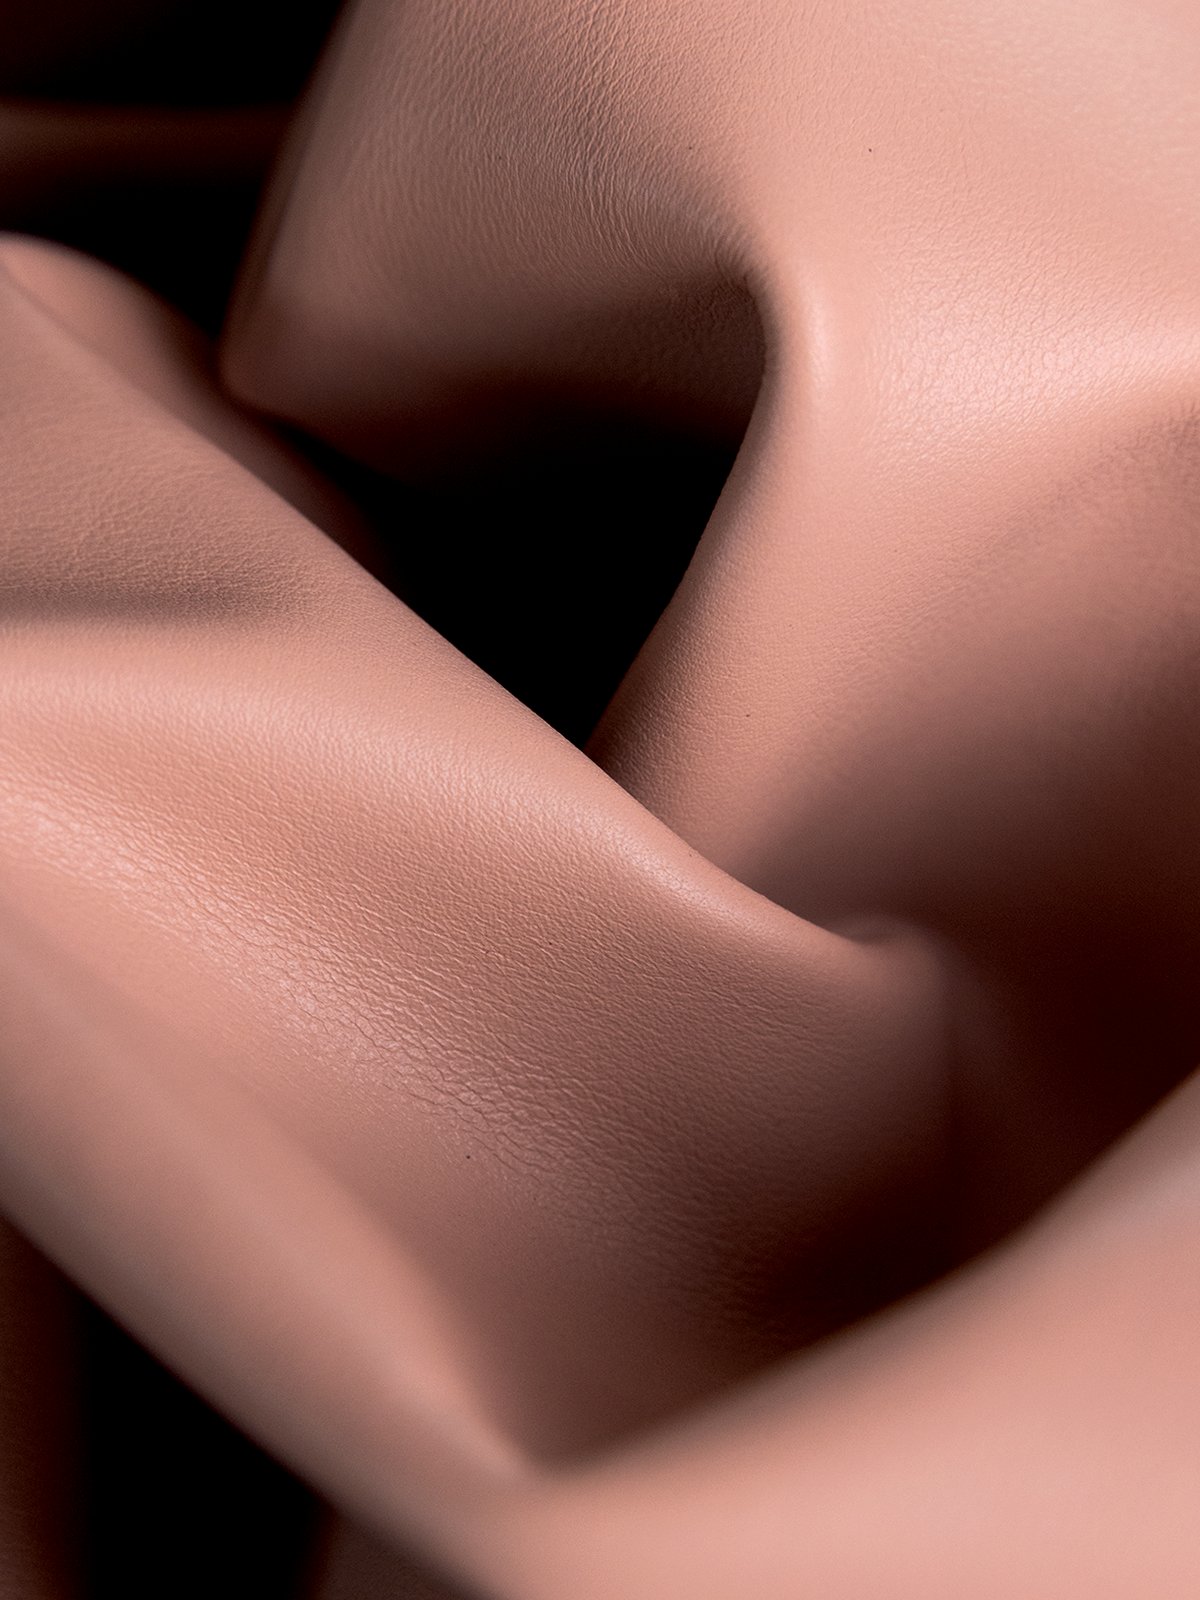 YouLeather, the ecological and futuristic skin finish